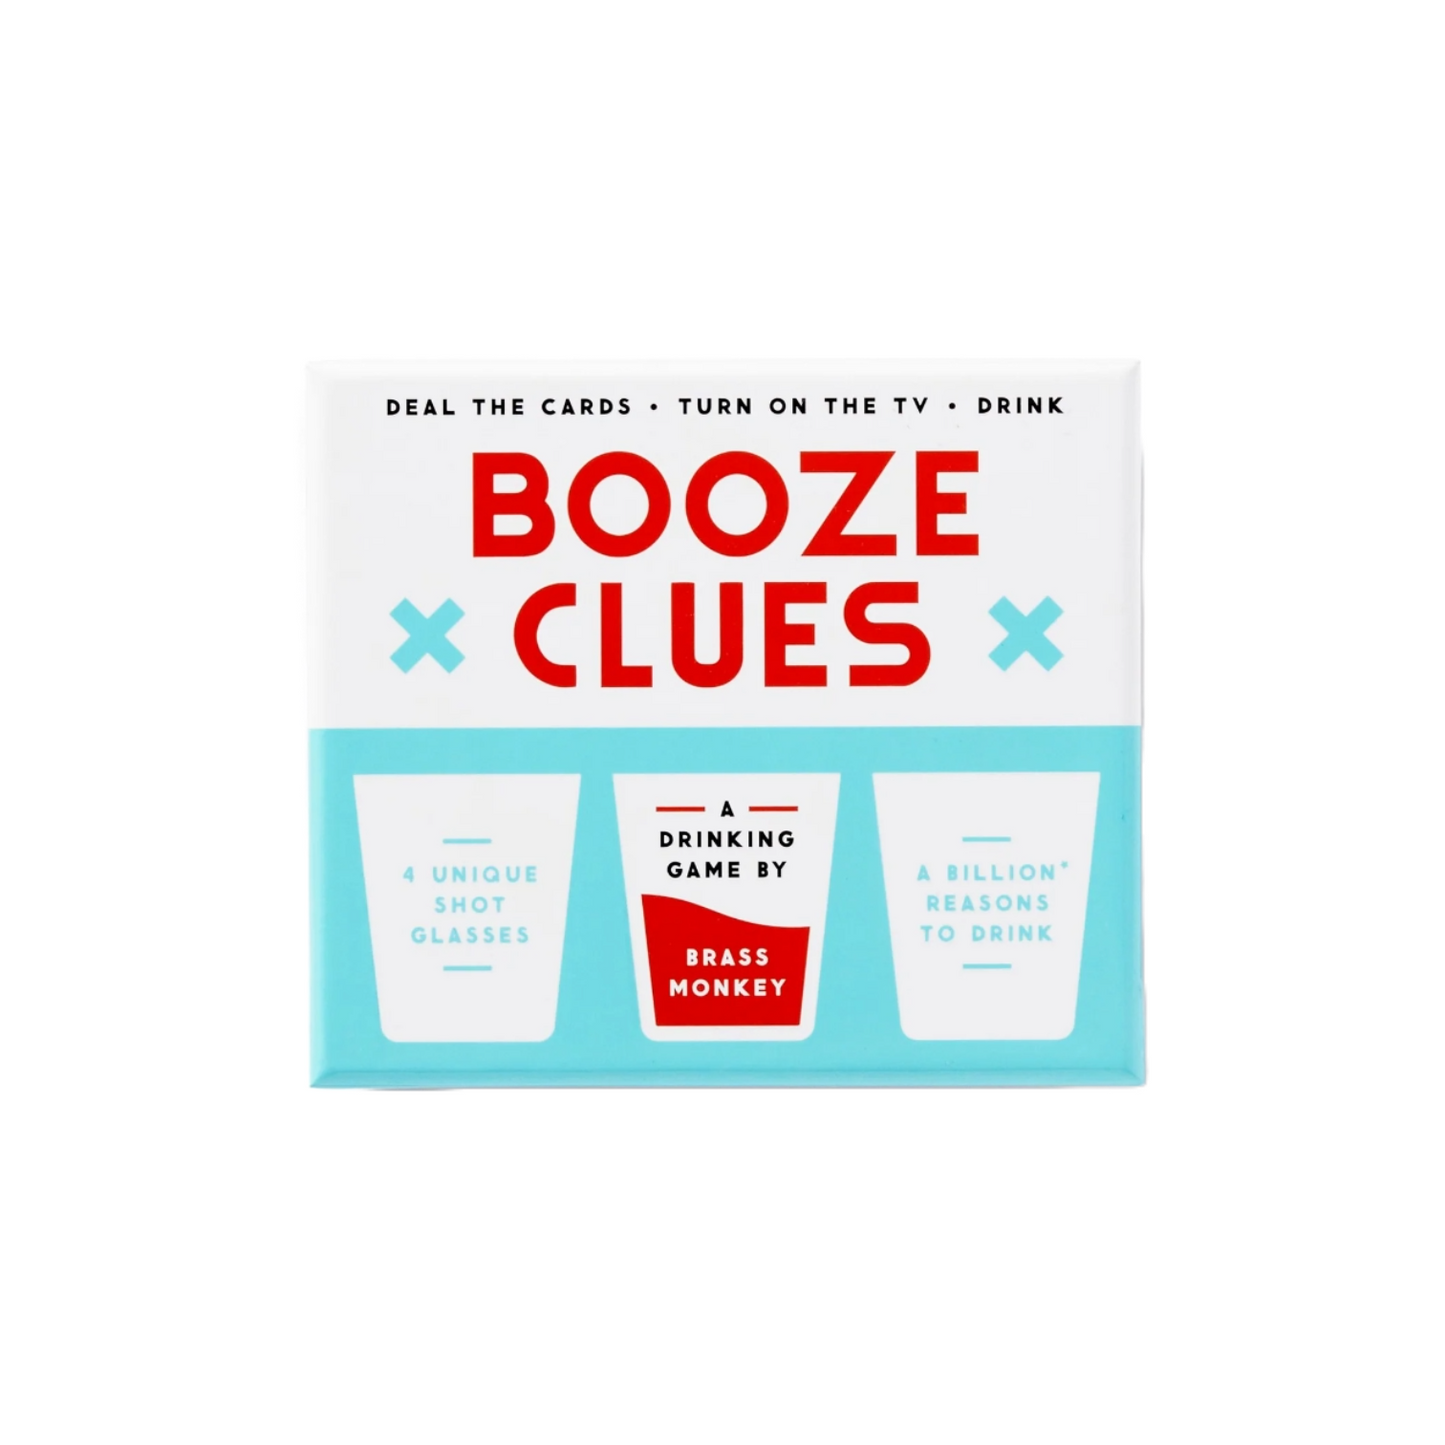 Booze Clues Drinking Game Set by Brass Monkey